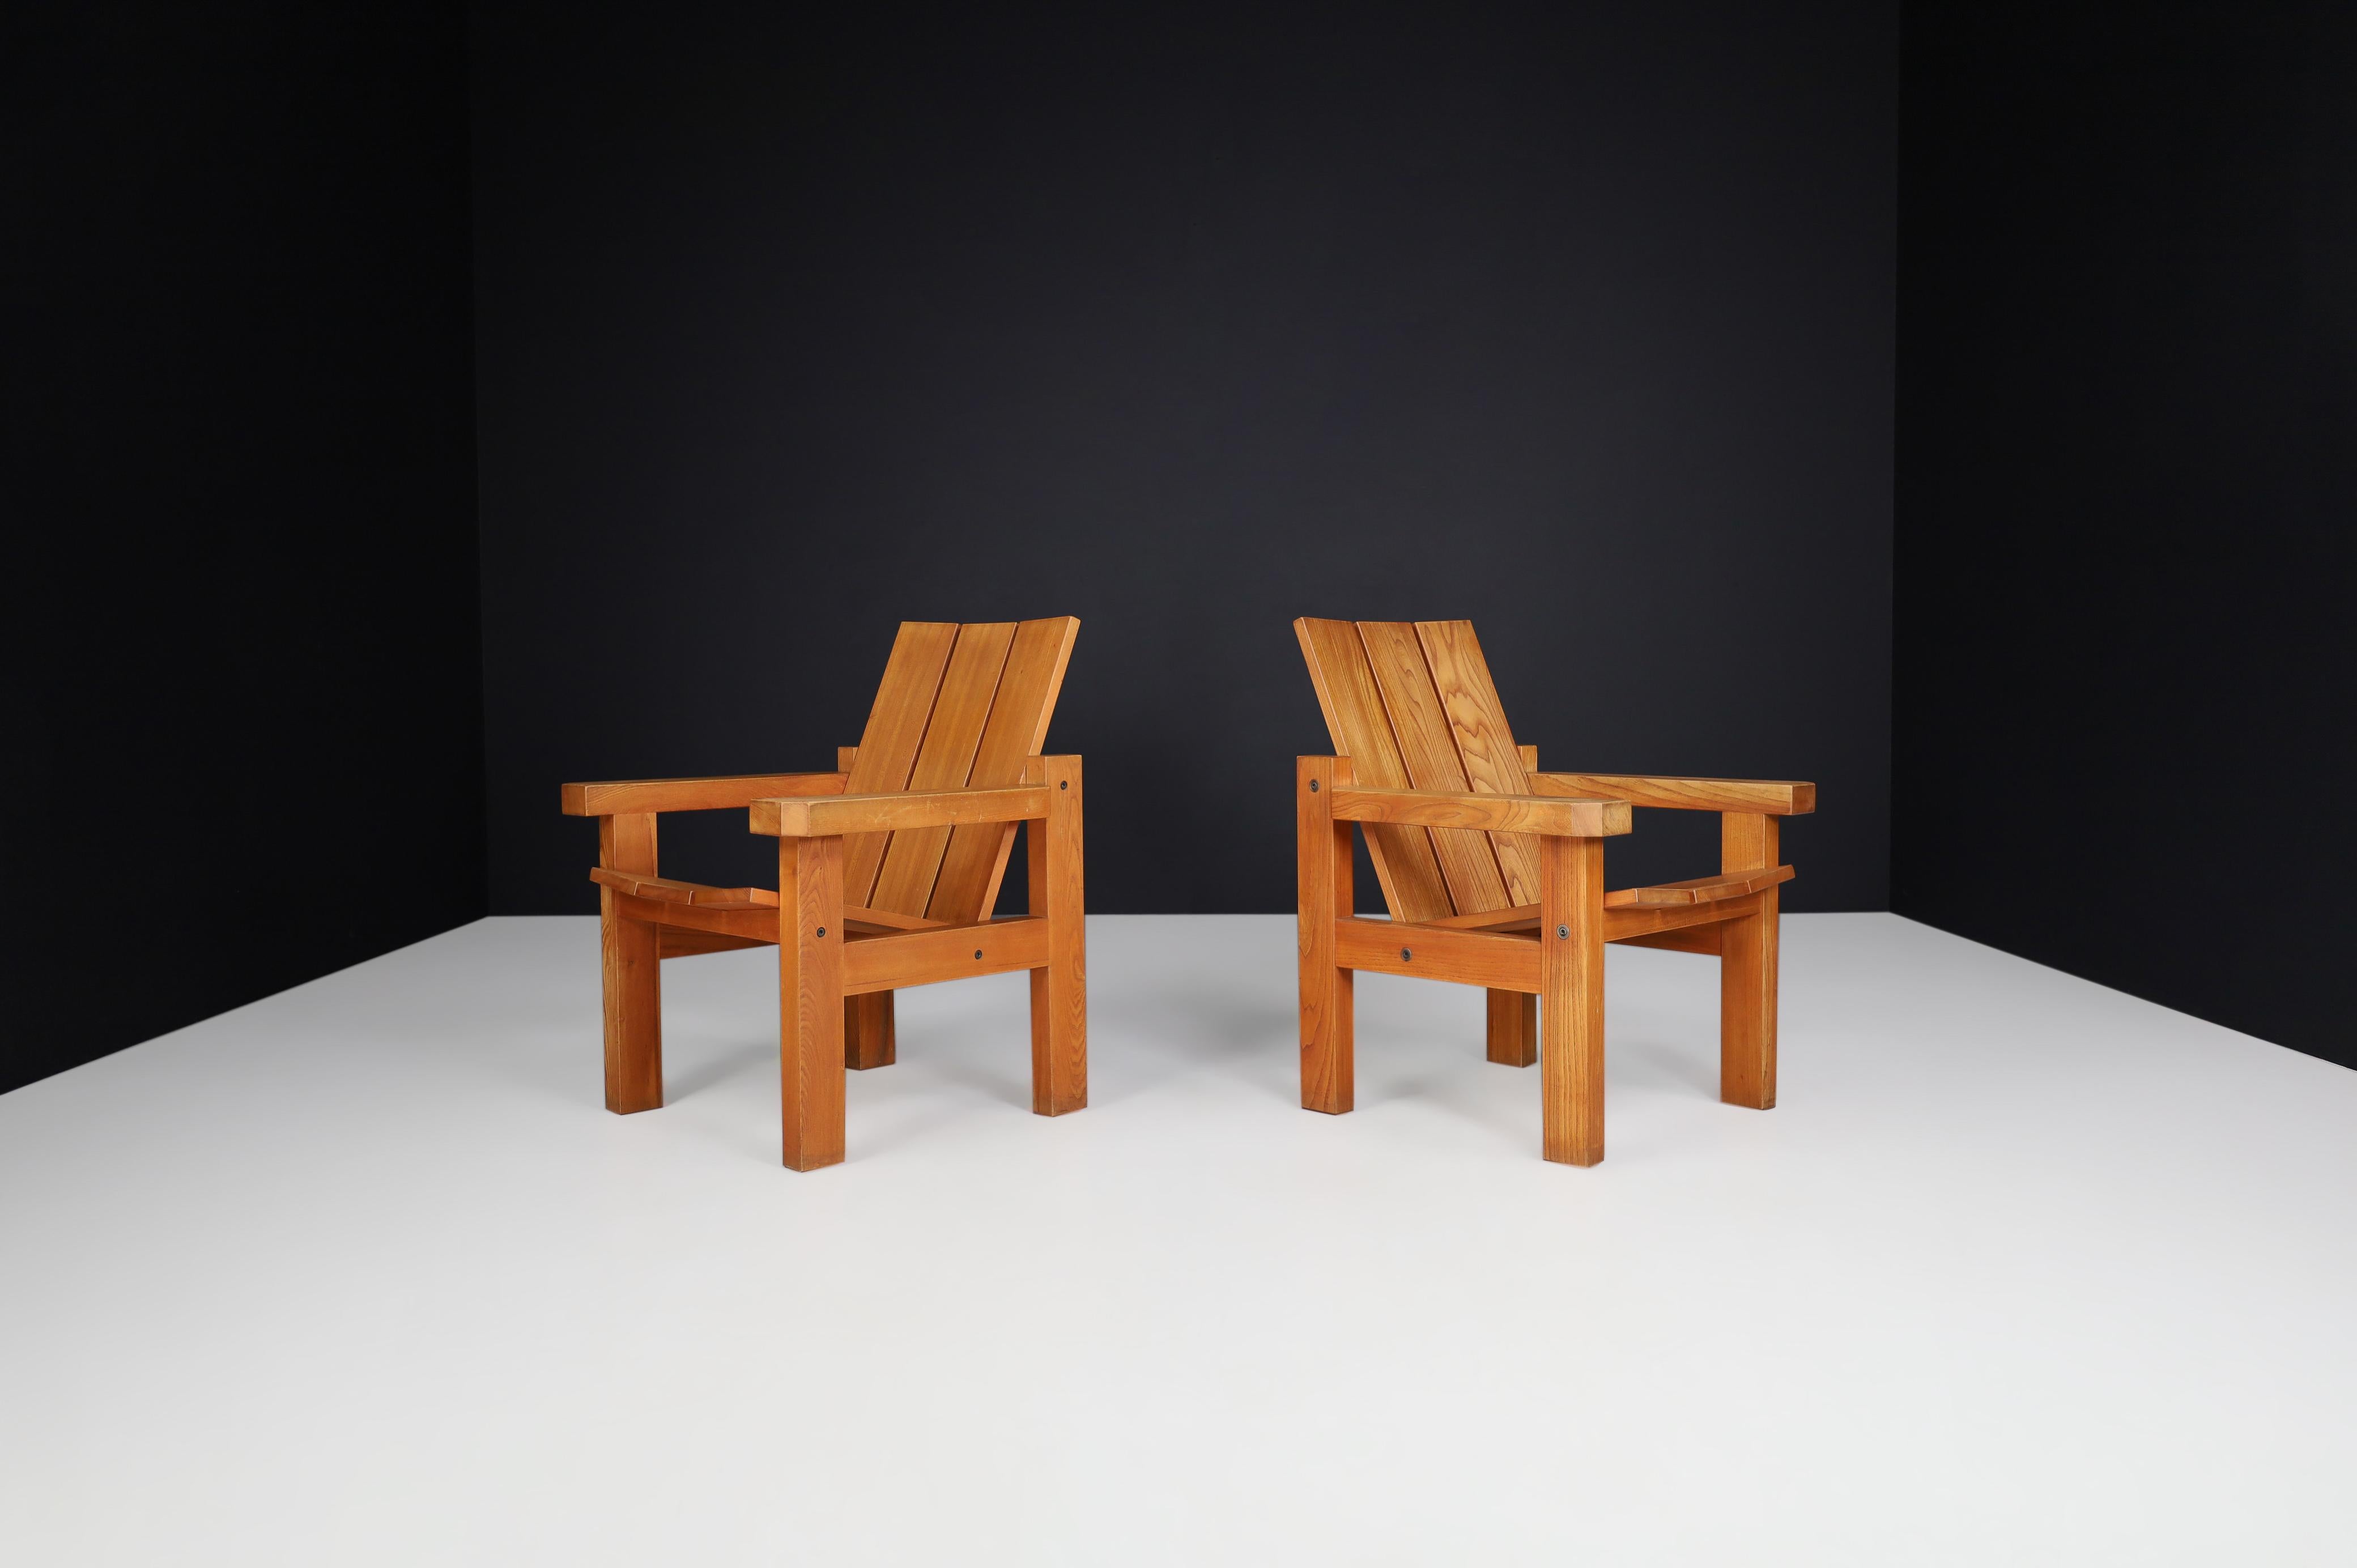 Mid-Century Modern - minimalist lounge chairs in solid Elm, France 1960s

Mid-Century Modern - minimalist lounge chairs made and designed in 1960 in France. These rare model chairs are made from solid elm wood like the Pierre Chapo and Wim